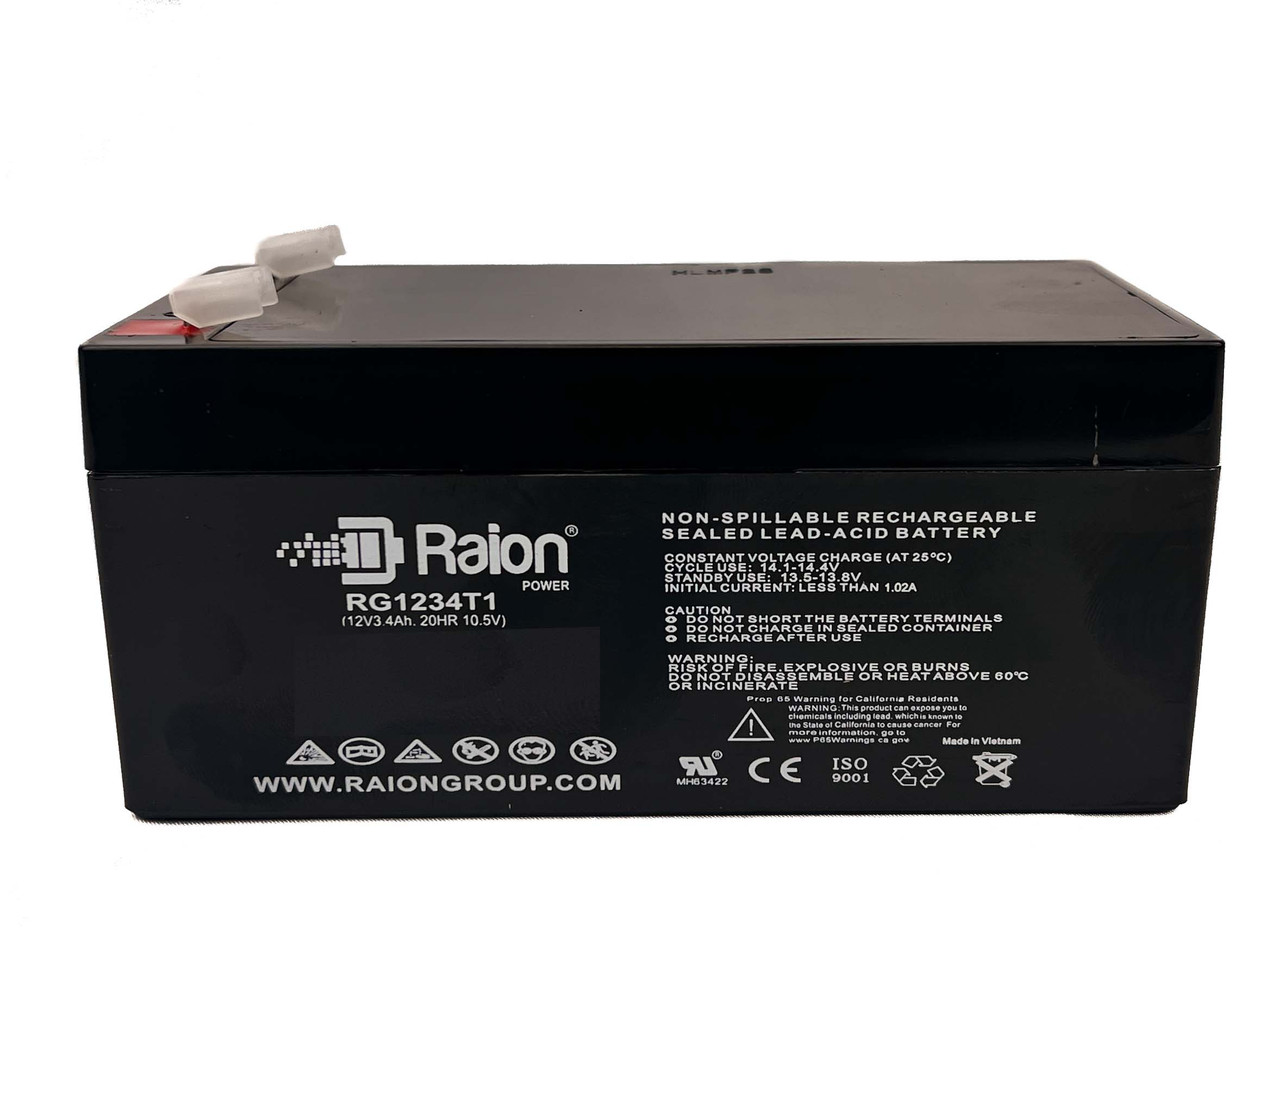 Raion Power RG1234T1 Rechargeable Compatible Replacement Battery for Cardiac Science 5350 Vital Sign Monitor